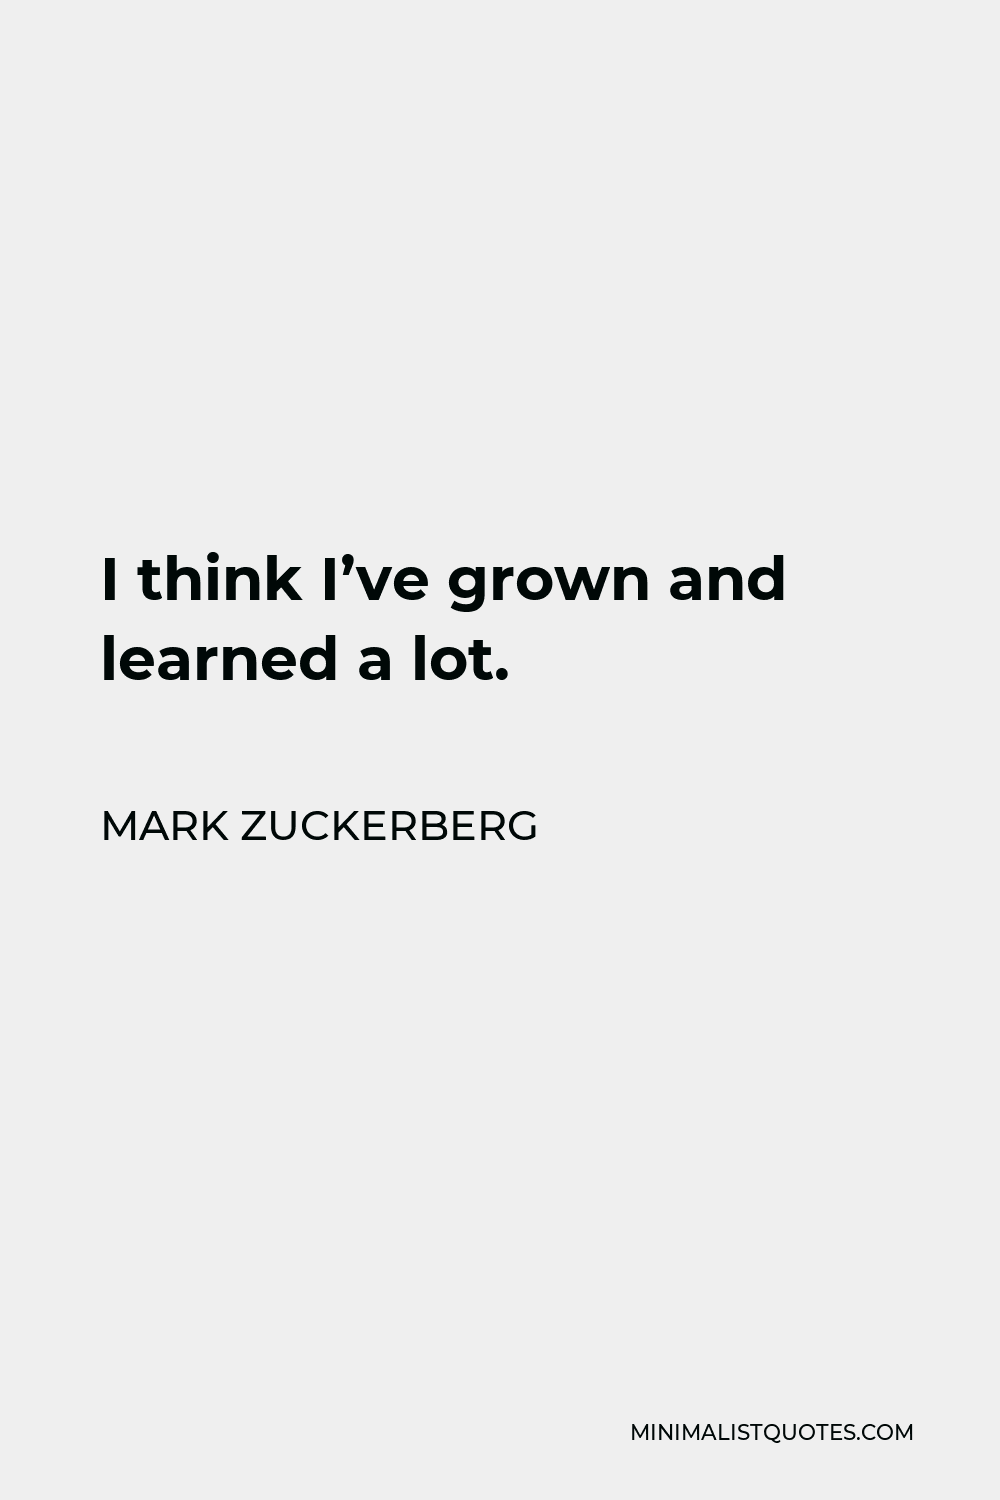 Mark Zuckerberg Quote - I think I’ve grown and learned a lot.